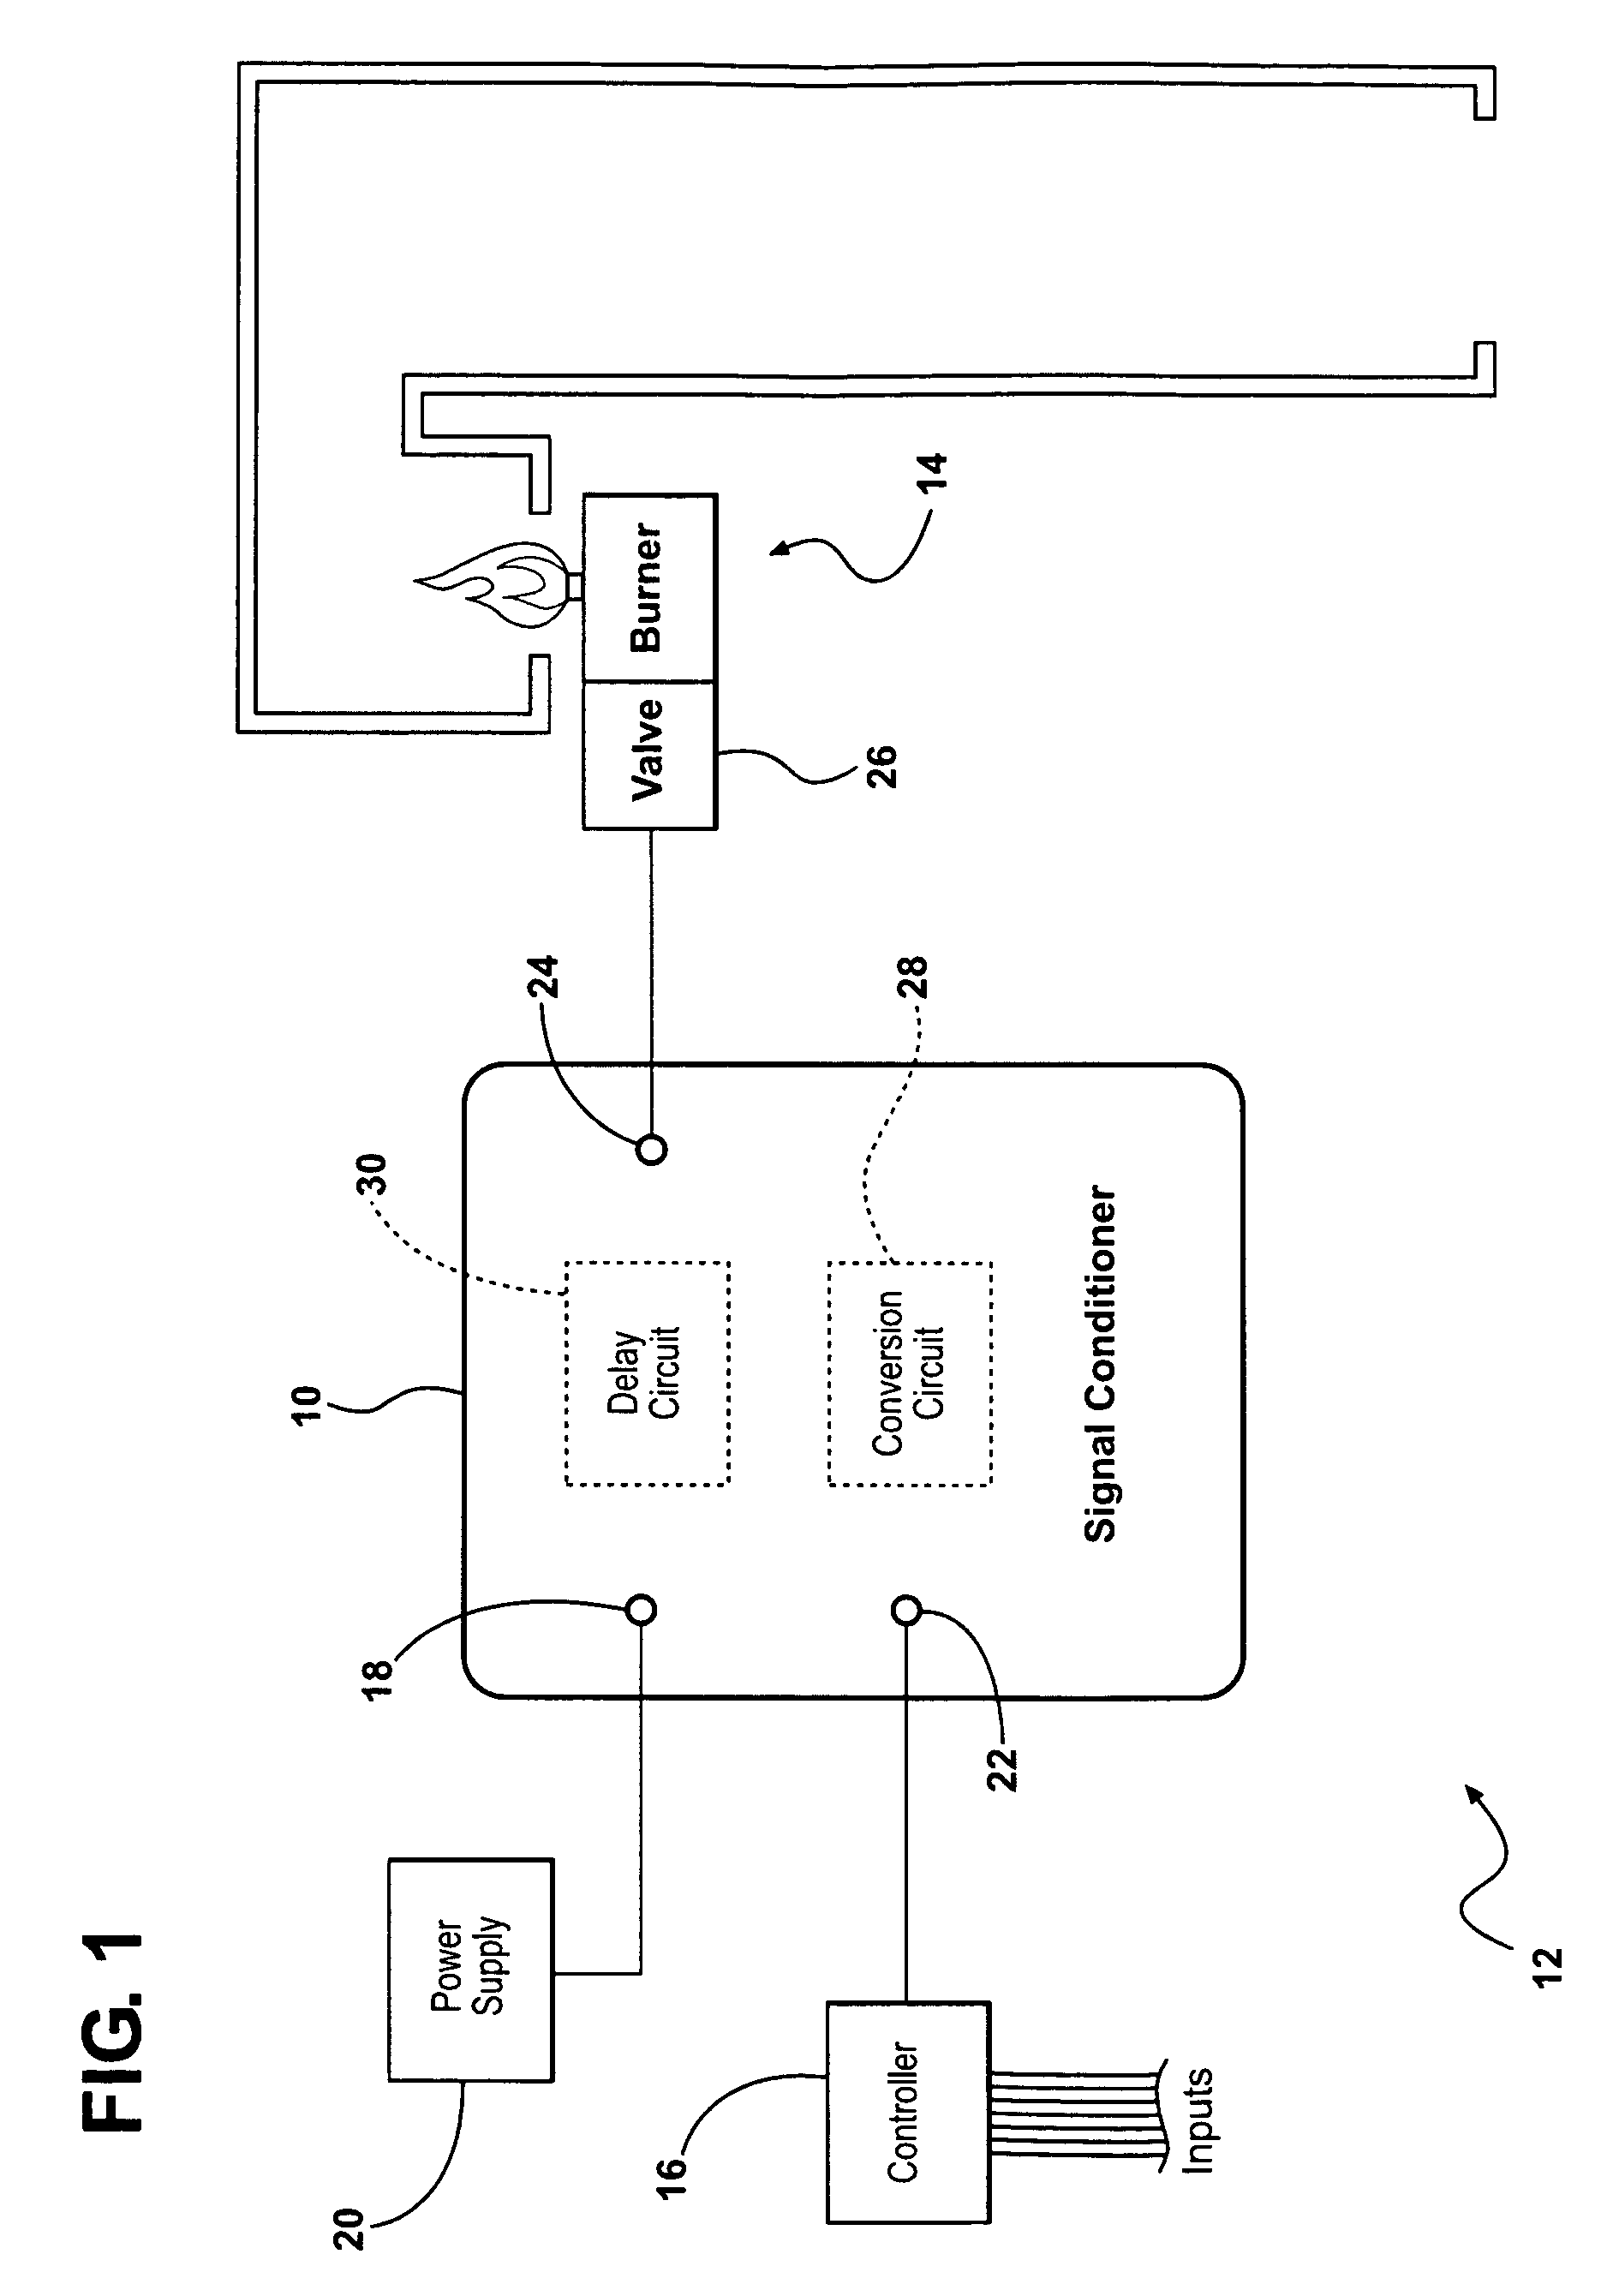 Signal conditioner for use in a burner control system